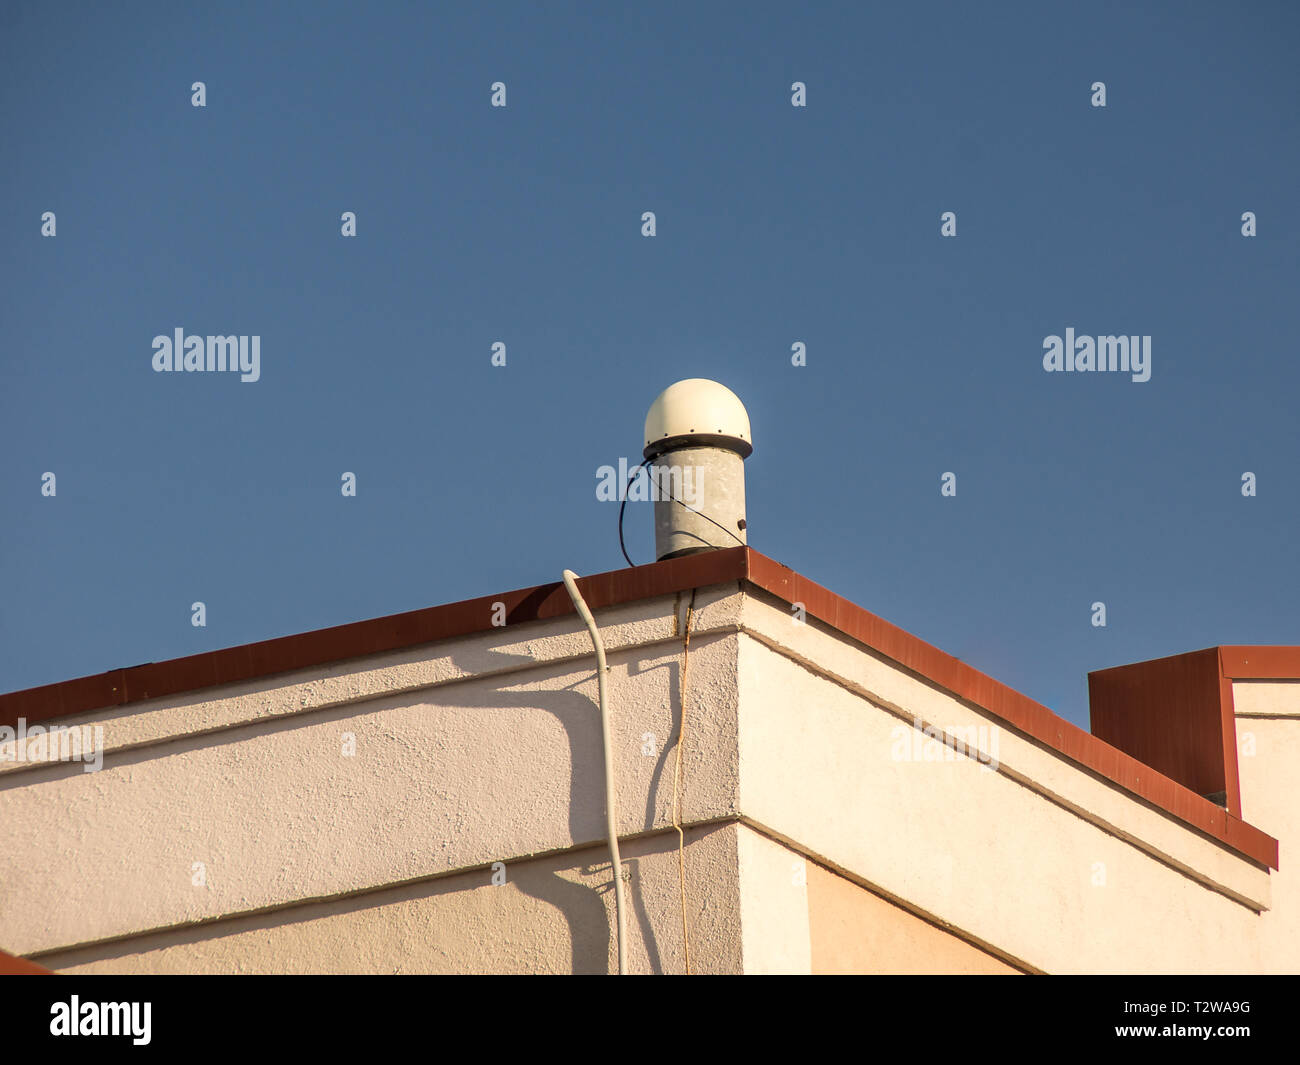 satellite surveying equipment, fixed gps base station, on the roof of a residential building Stock Photo